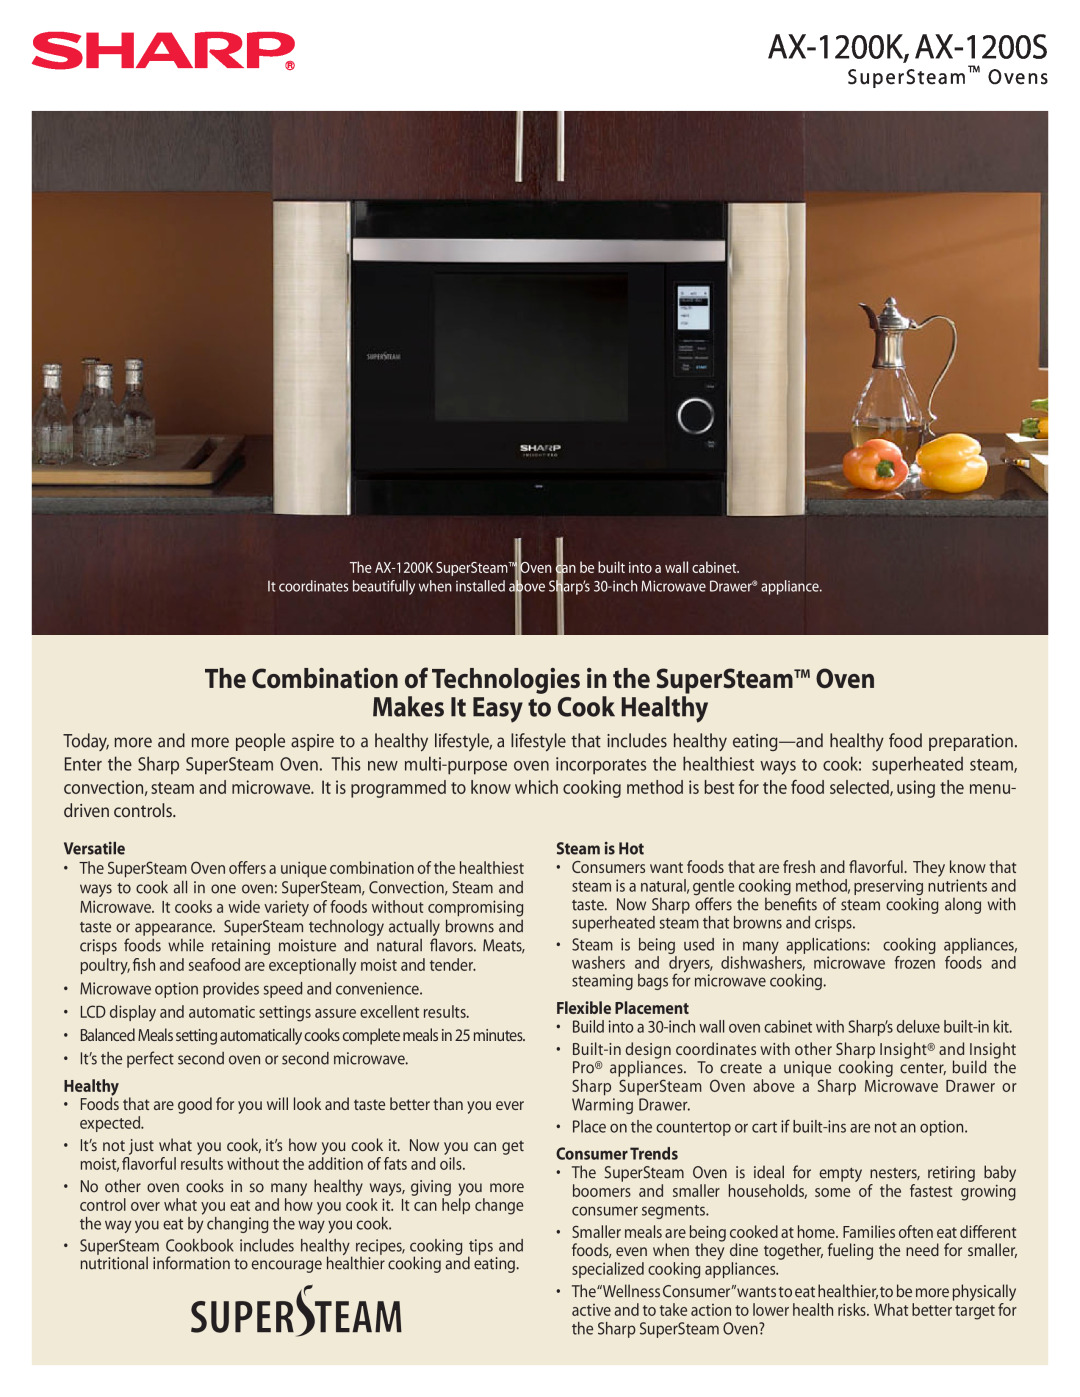 Sharp manual SuperSteam Ovens, AX-1200K, AX-1200S, Makes It Easy to Cook Healthy, Versatile, Steam is Hot 